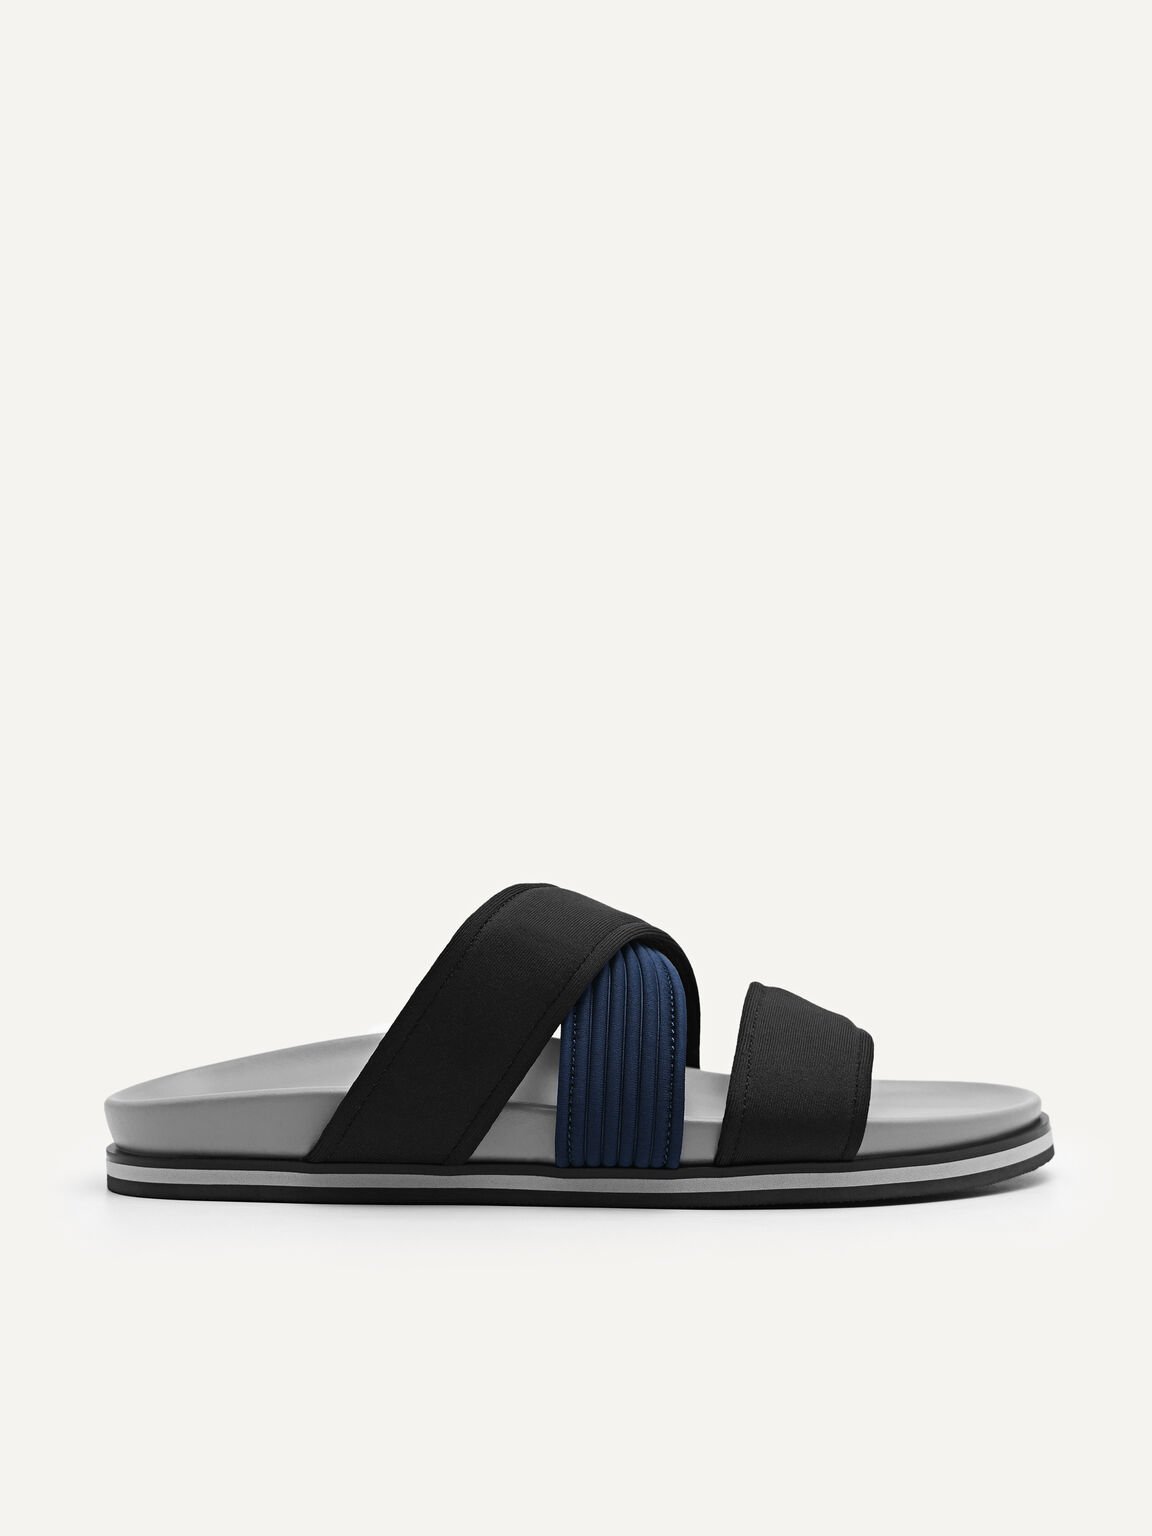 rePEDRO Pleated Sandals, Navy